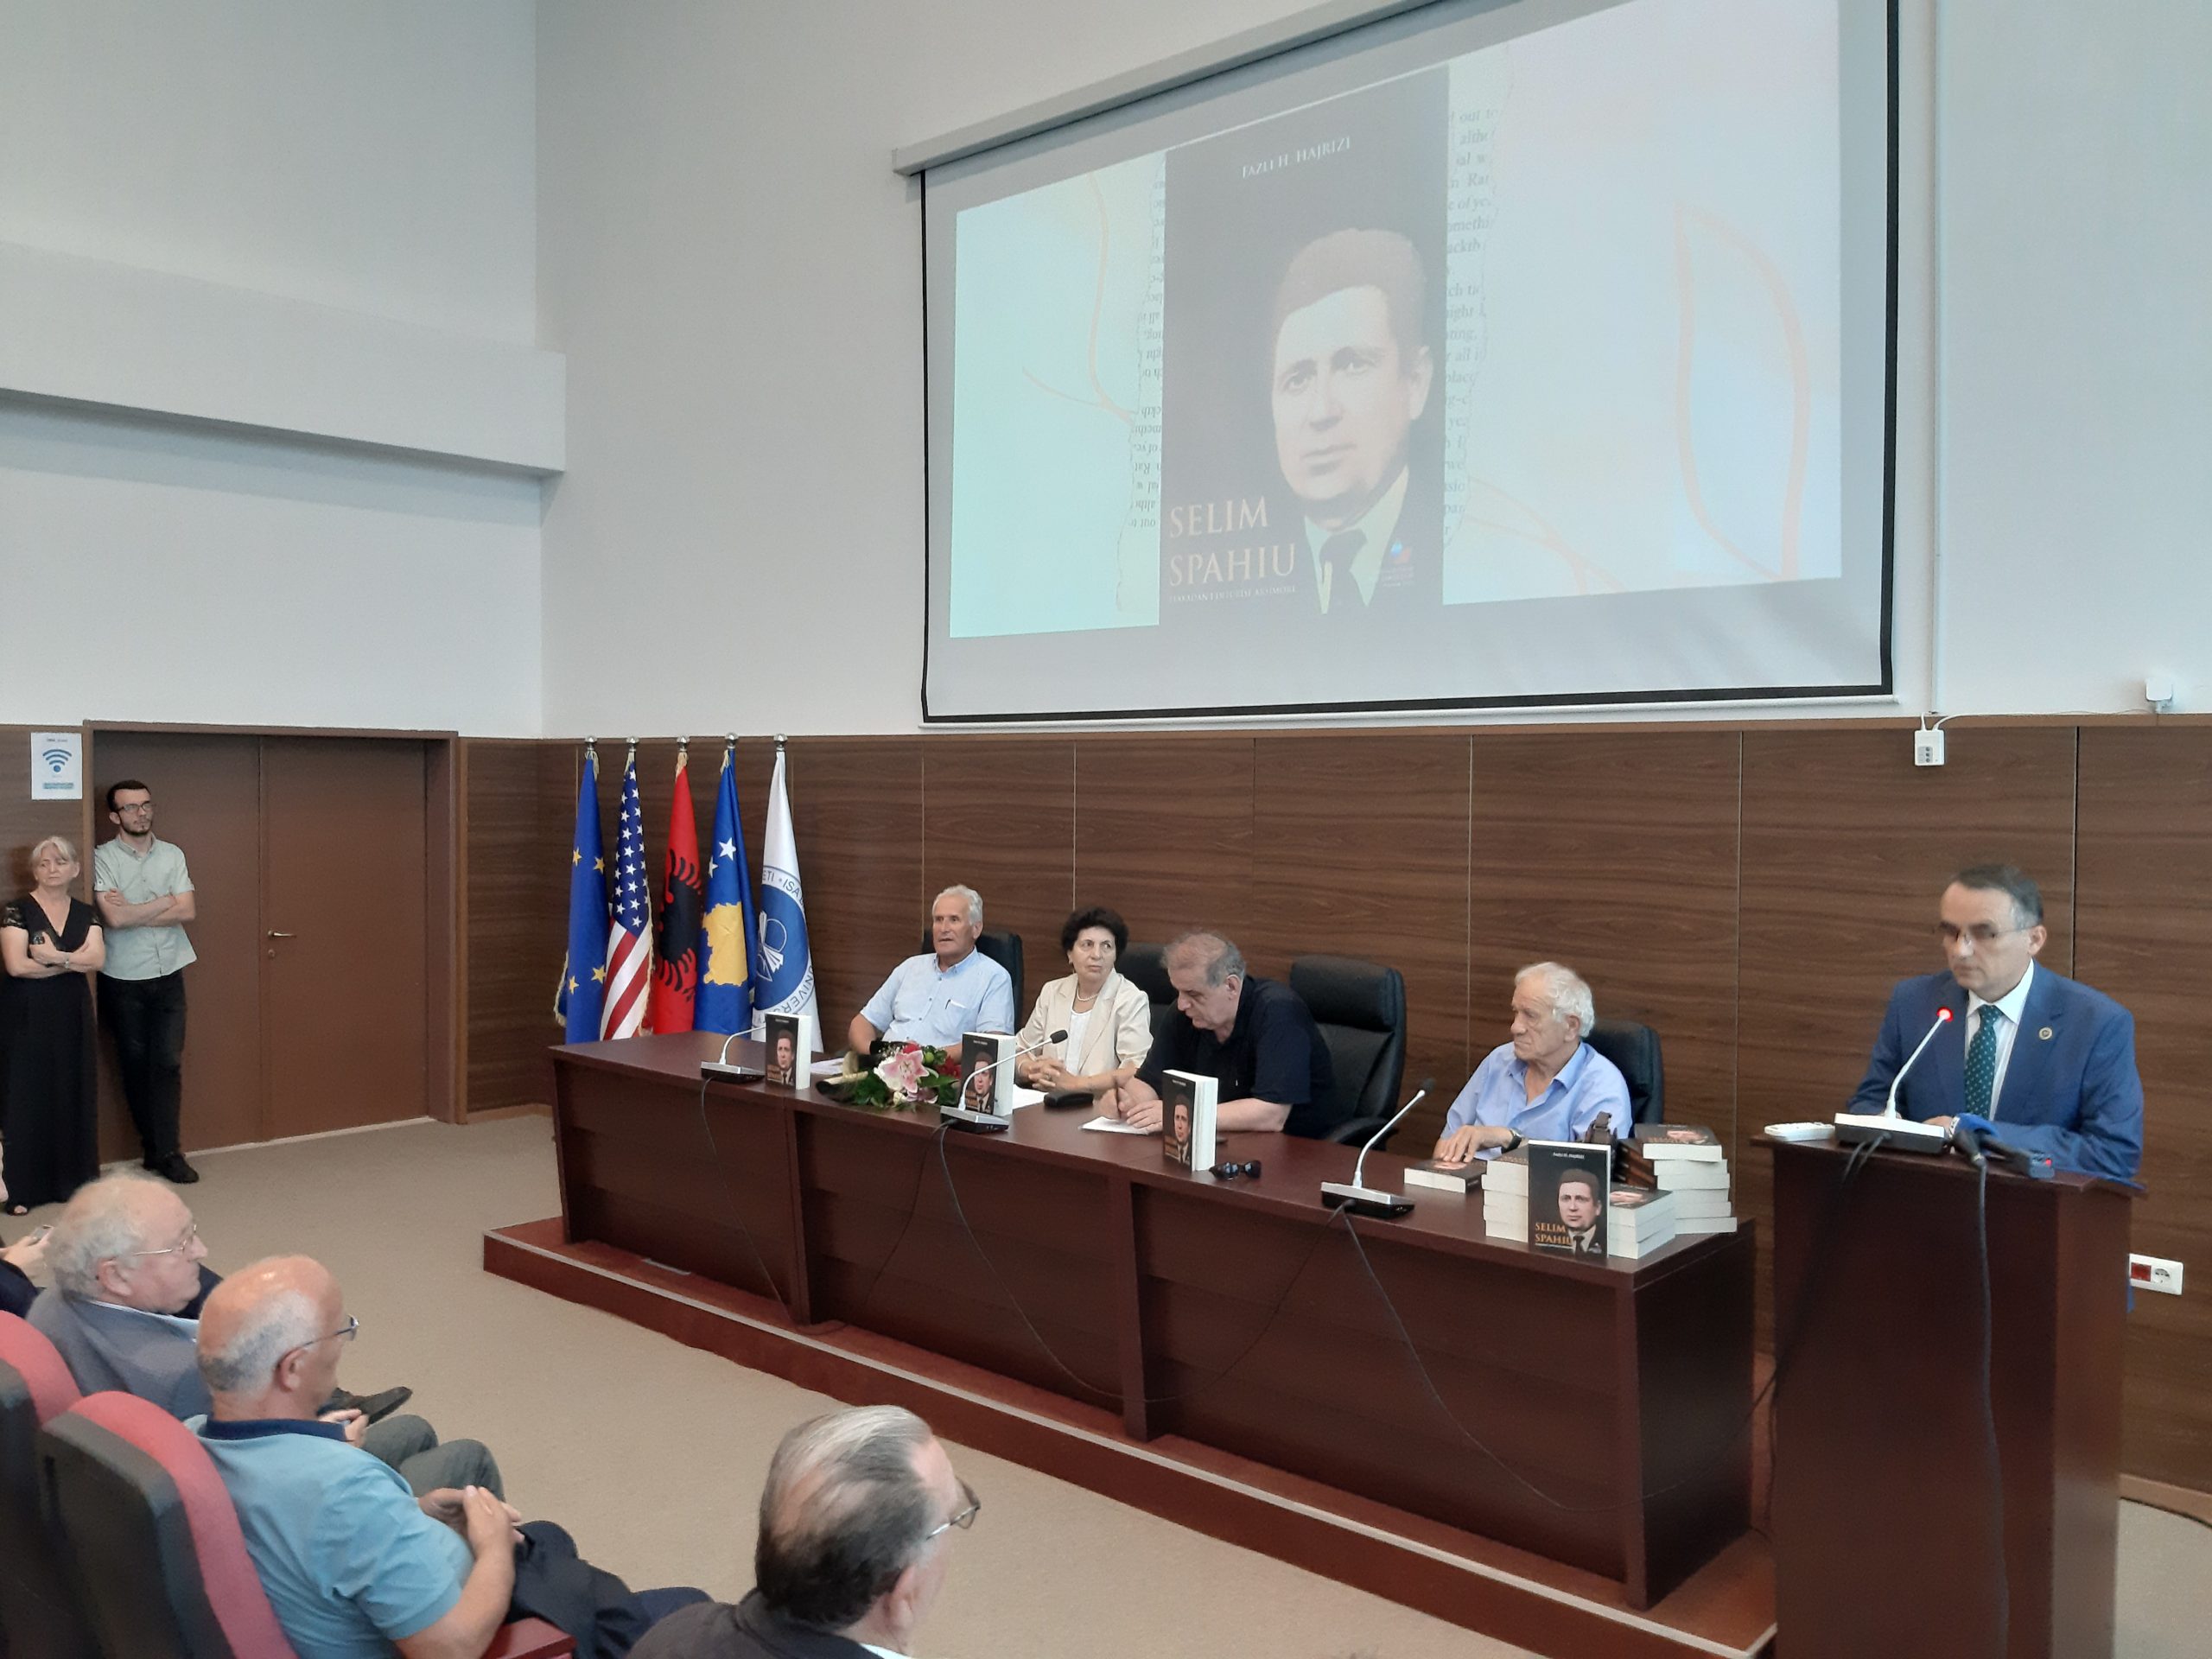 The Monograph: “Selim Spahiu – Flame Of Educational Knowledge”, By The Author, Fazli Hajrizi, Was Promoted